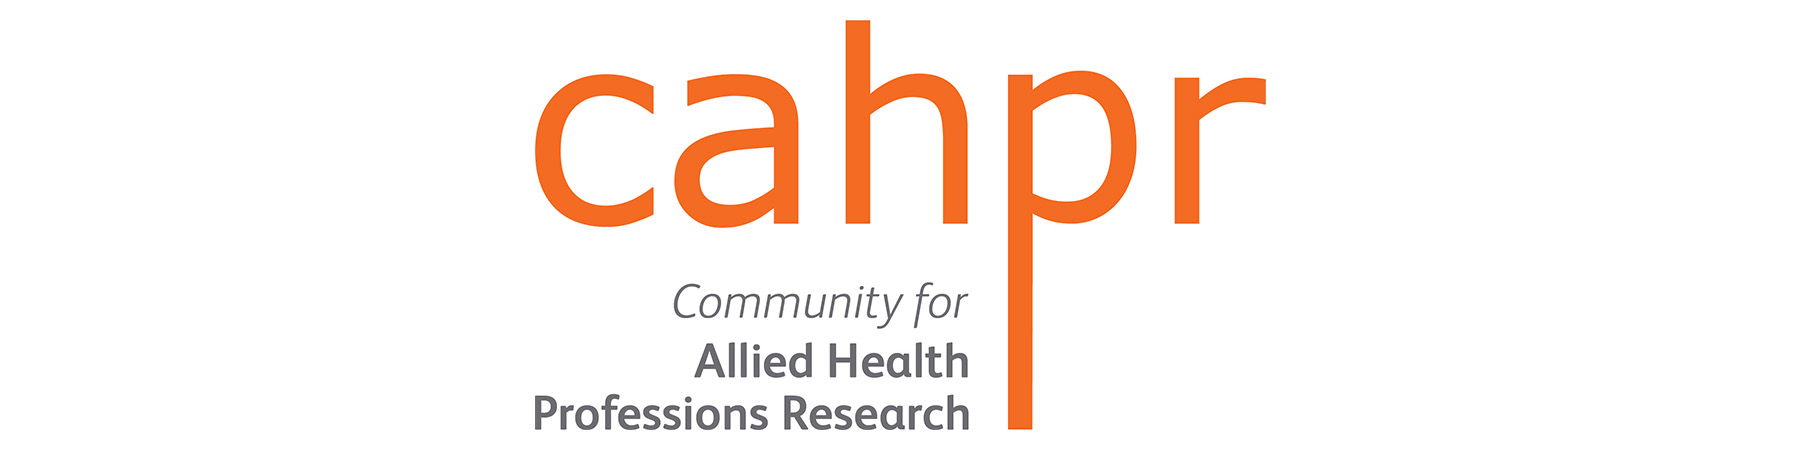 Community for Allied Health Professions Research (CAHPR)